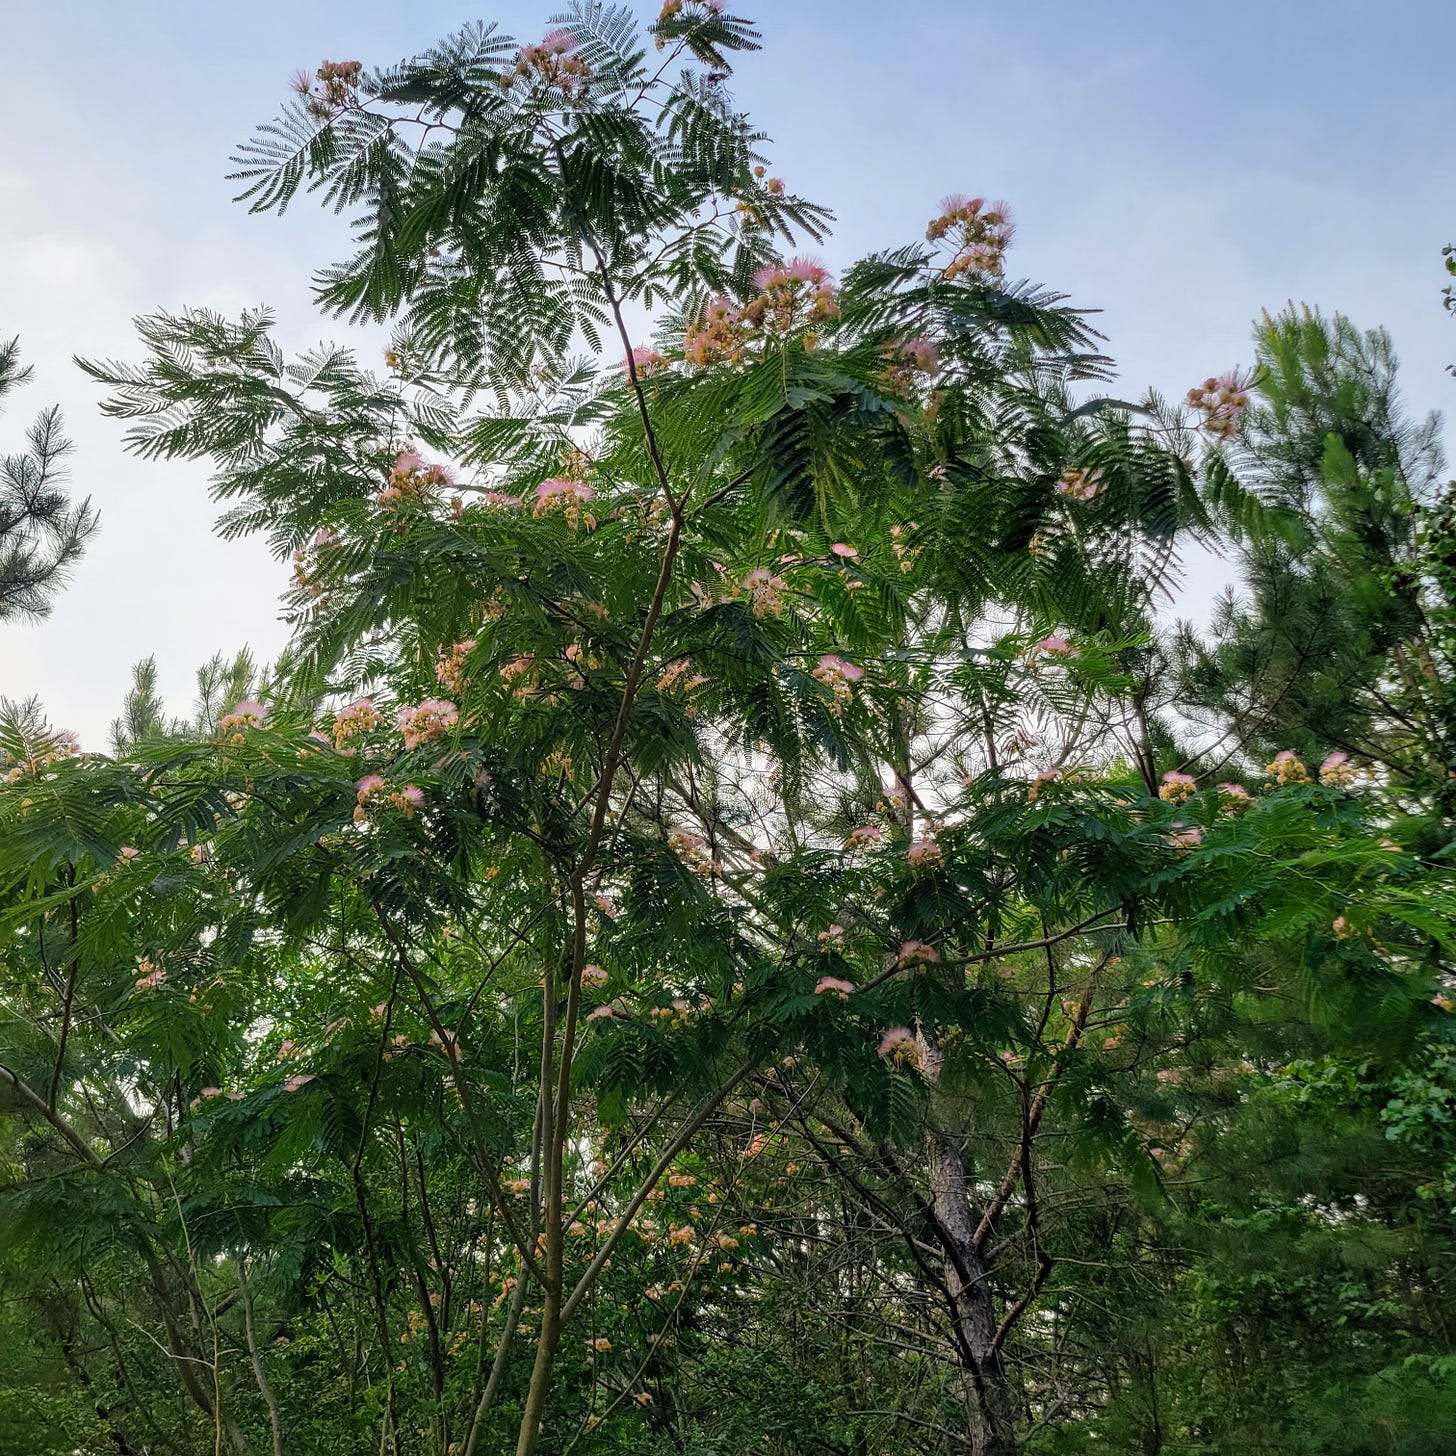 Green mimosa trees are blooming a burst of fireworks-like pink set upon the blue Tennessee sky